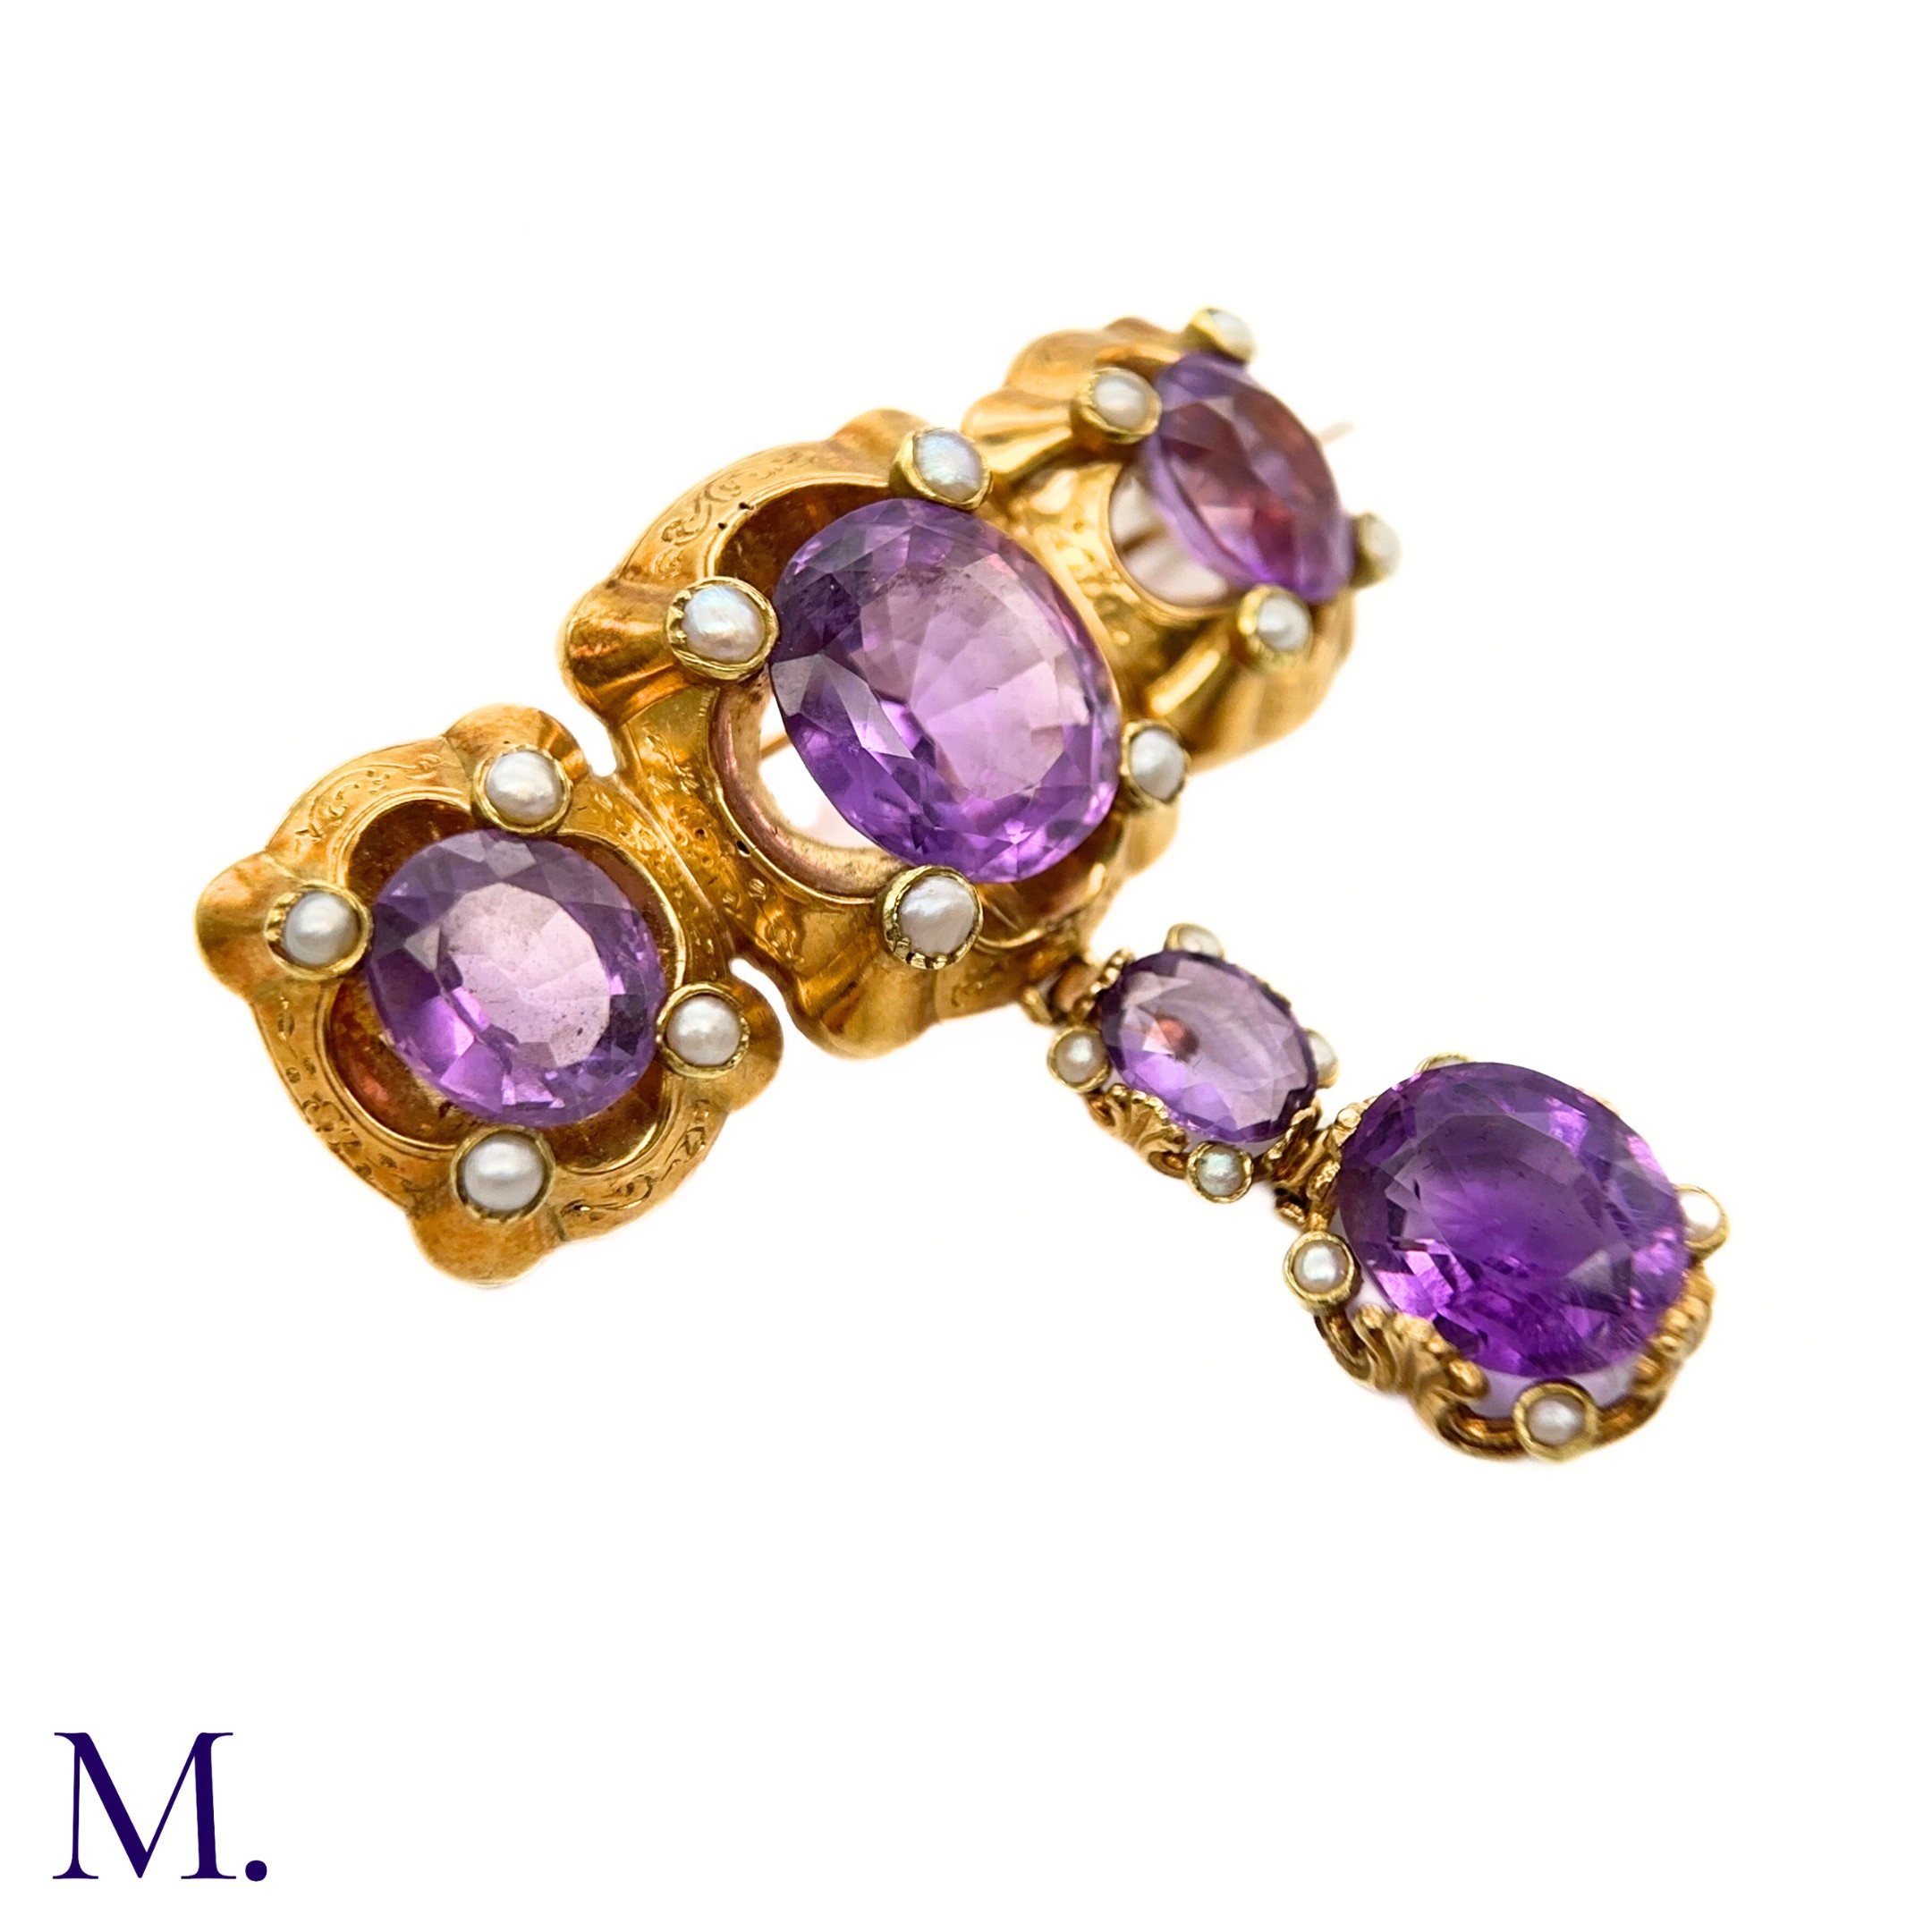 An Antique Amethyst and Pearl Drop Brooch - Image 4 of 6